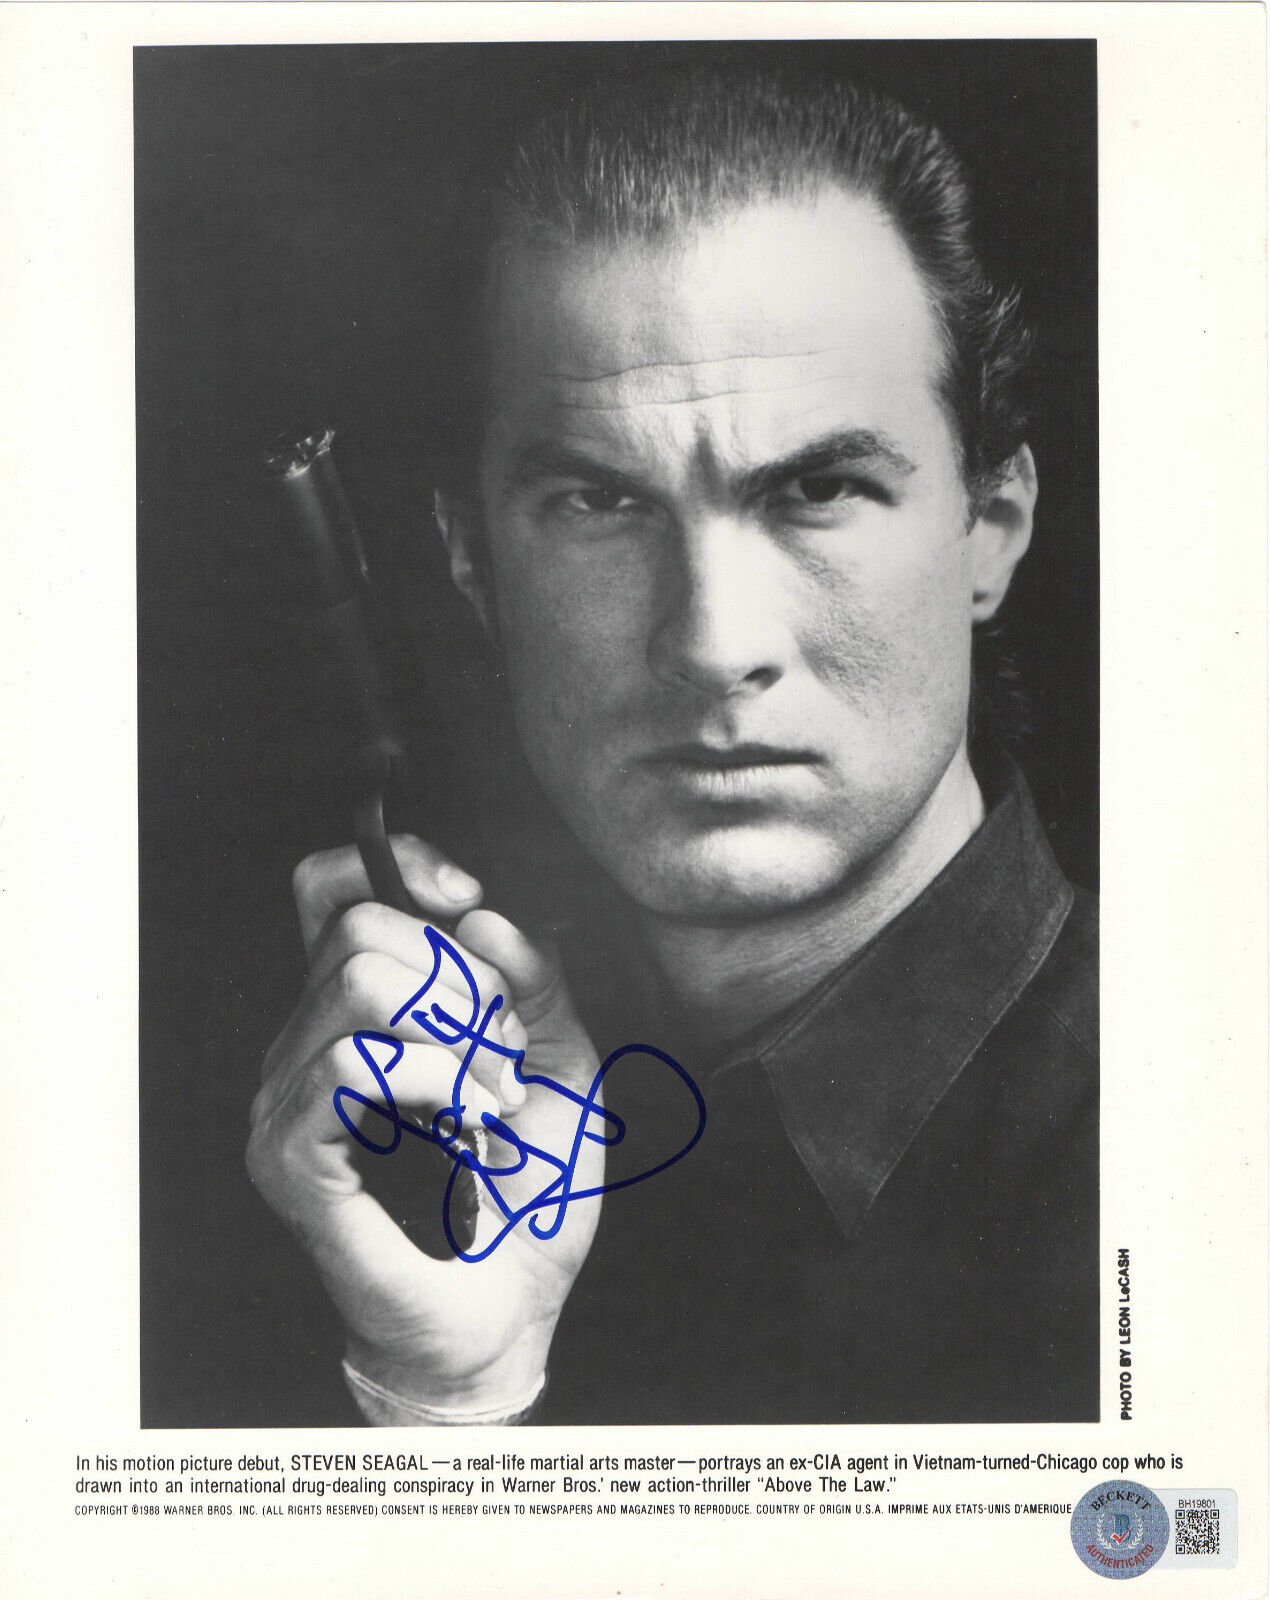 W@W STEVEN SEAGAL SIGNED AUTOGRAPH ABOVE THE LAW 8X10 PHOTO BECKETT BAS